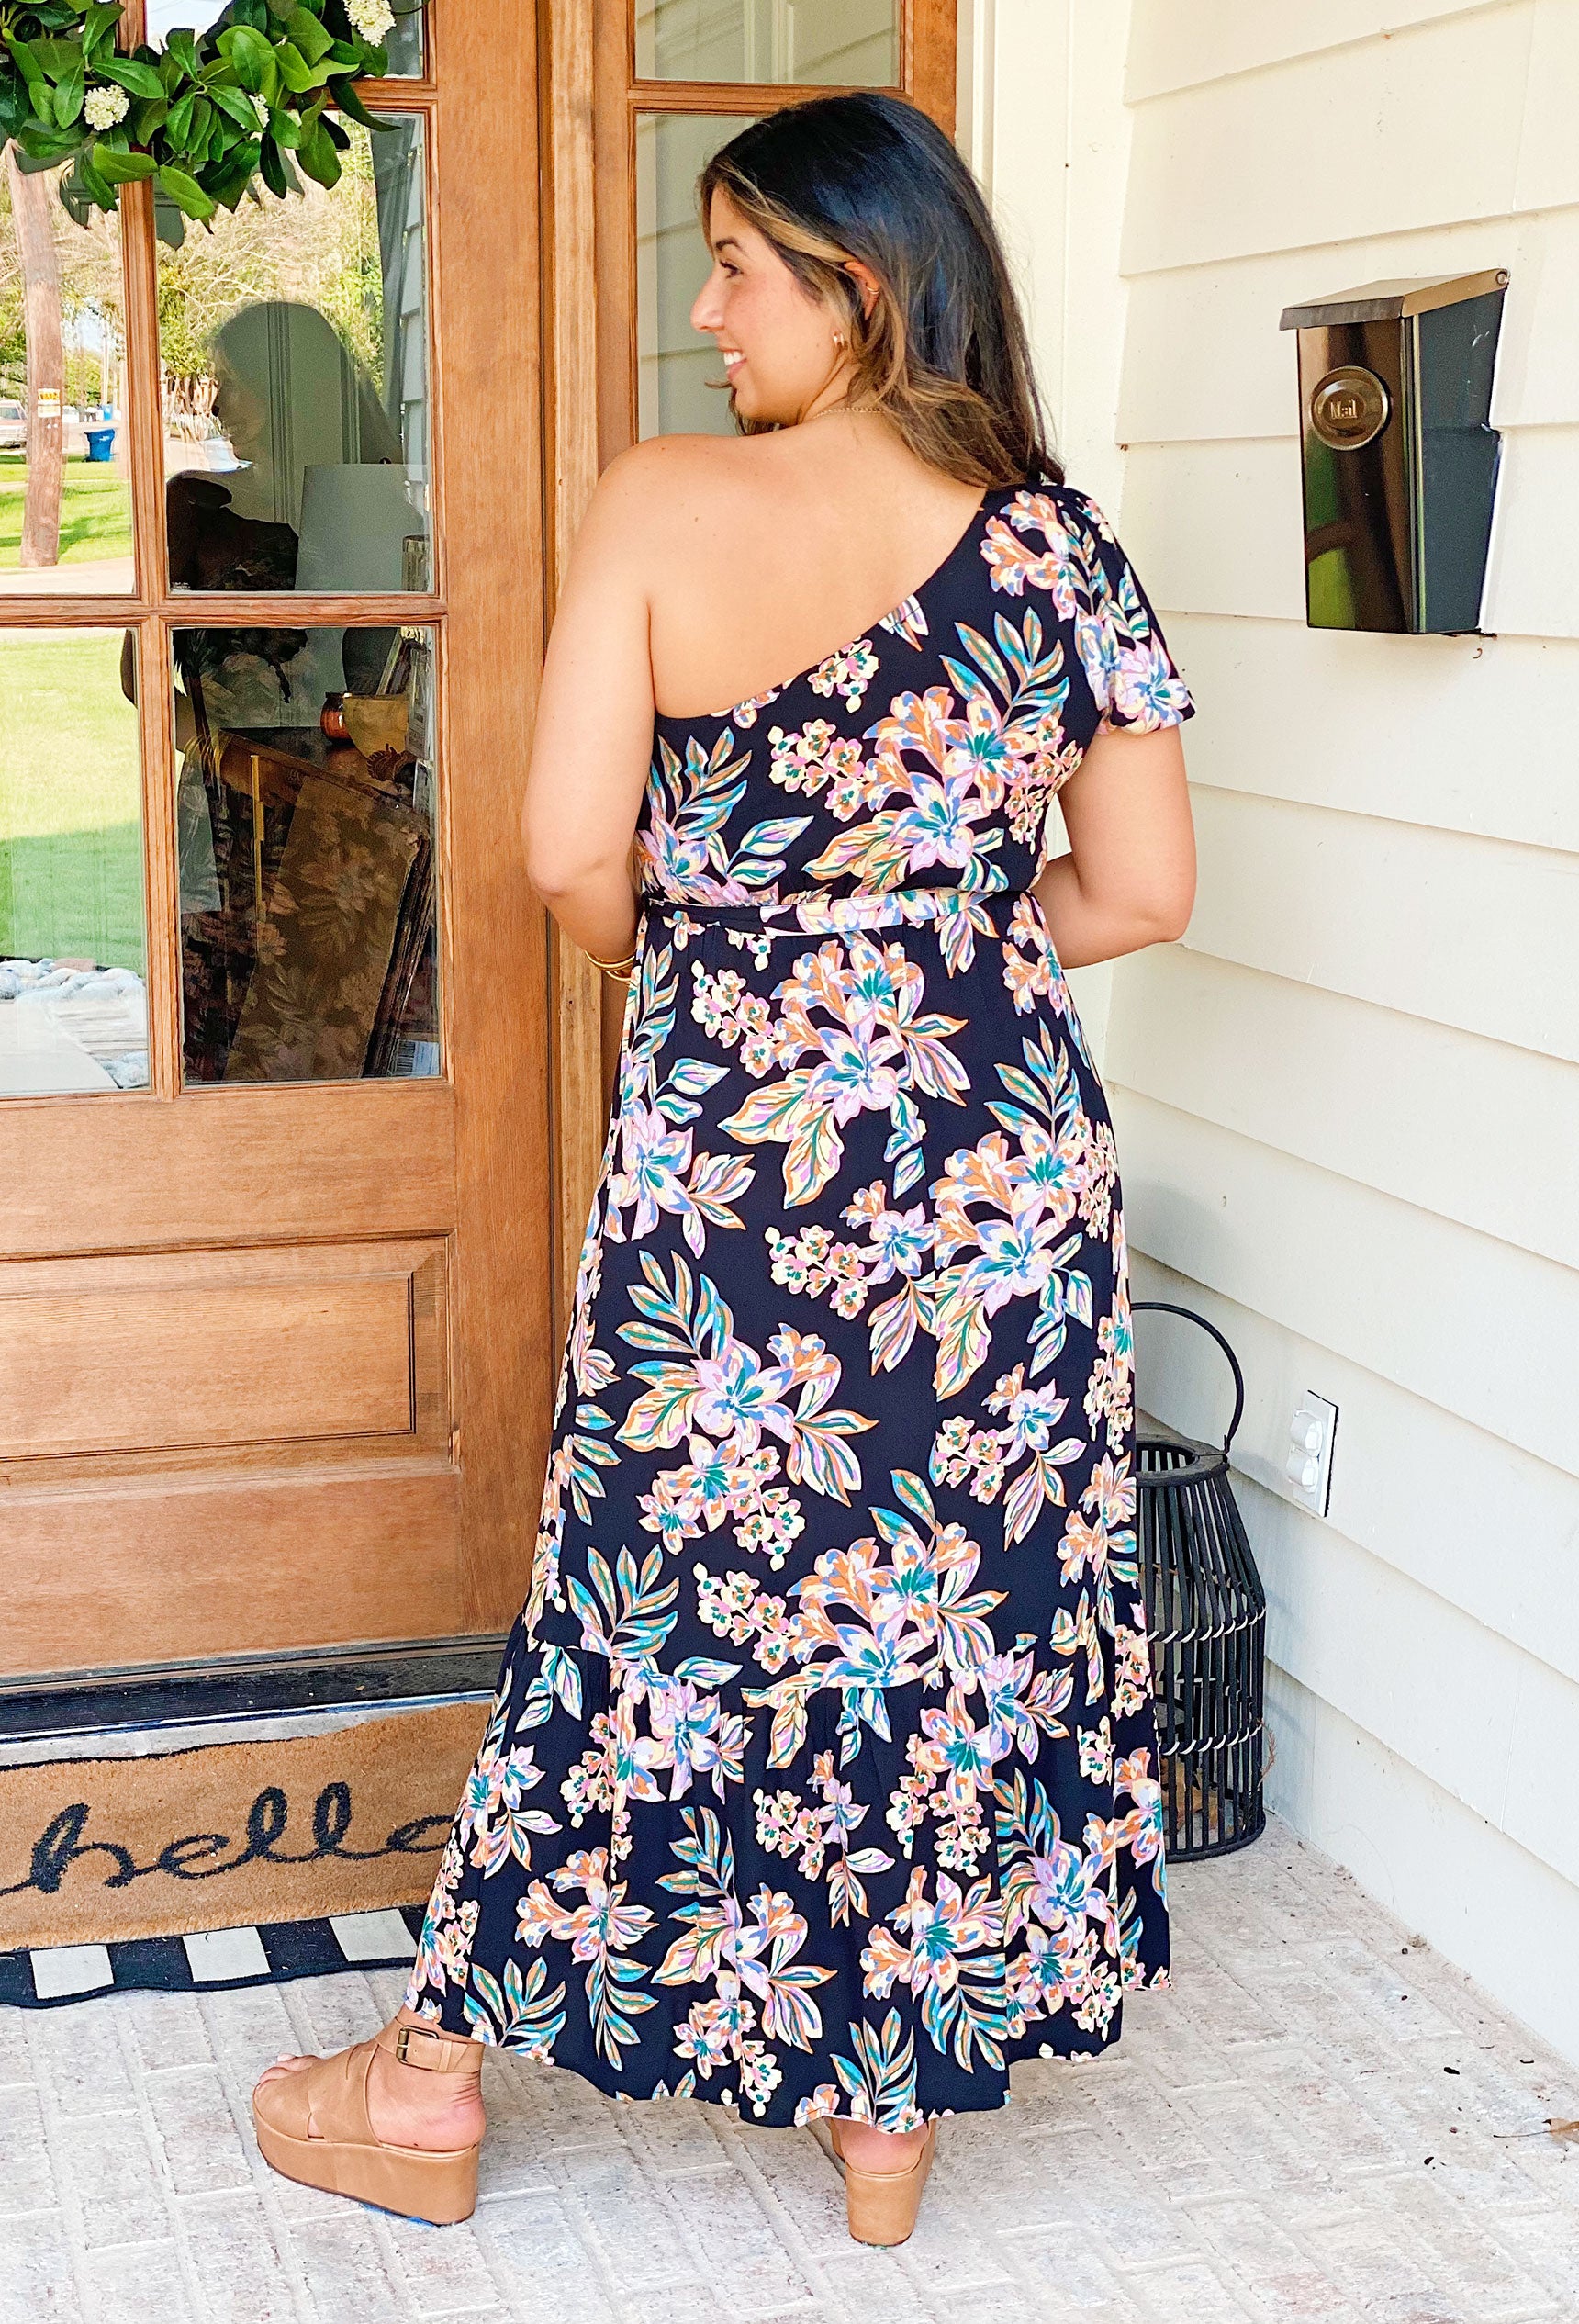 Really Dreamy Floral Midi Dress, one-shoulder dress featuring a stunning floral print, a flattering midi length and a subtle slit detail